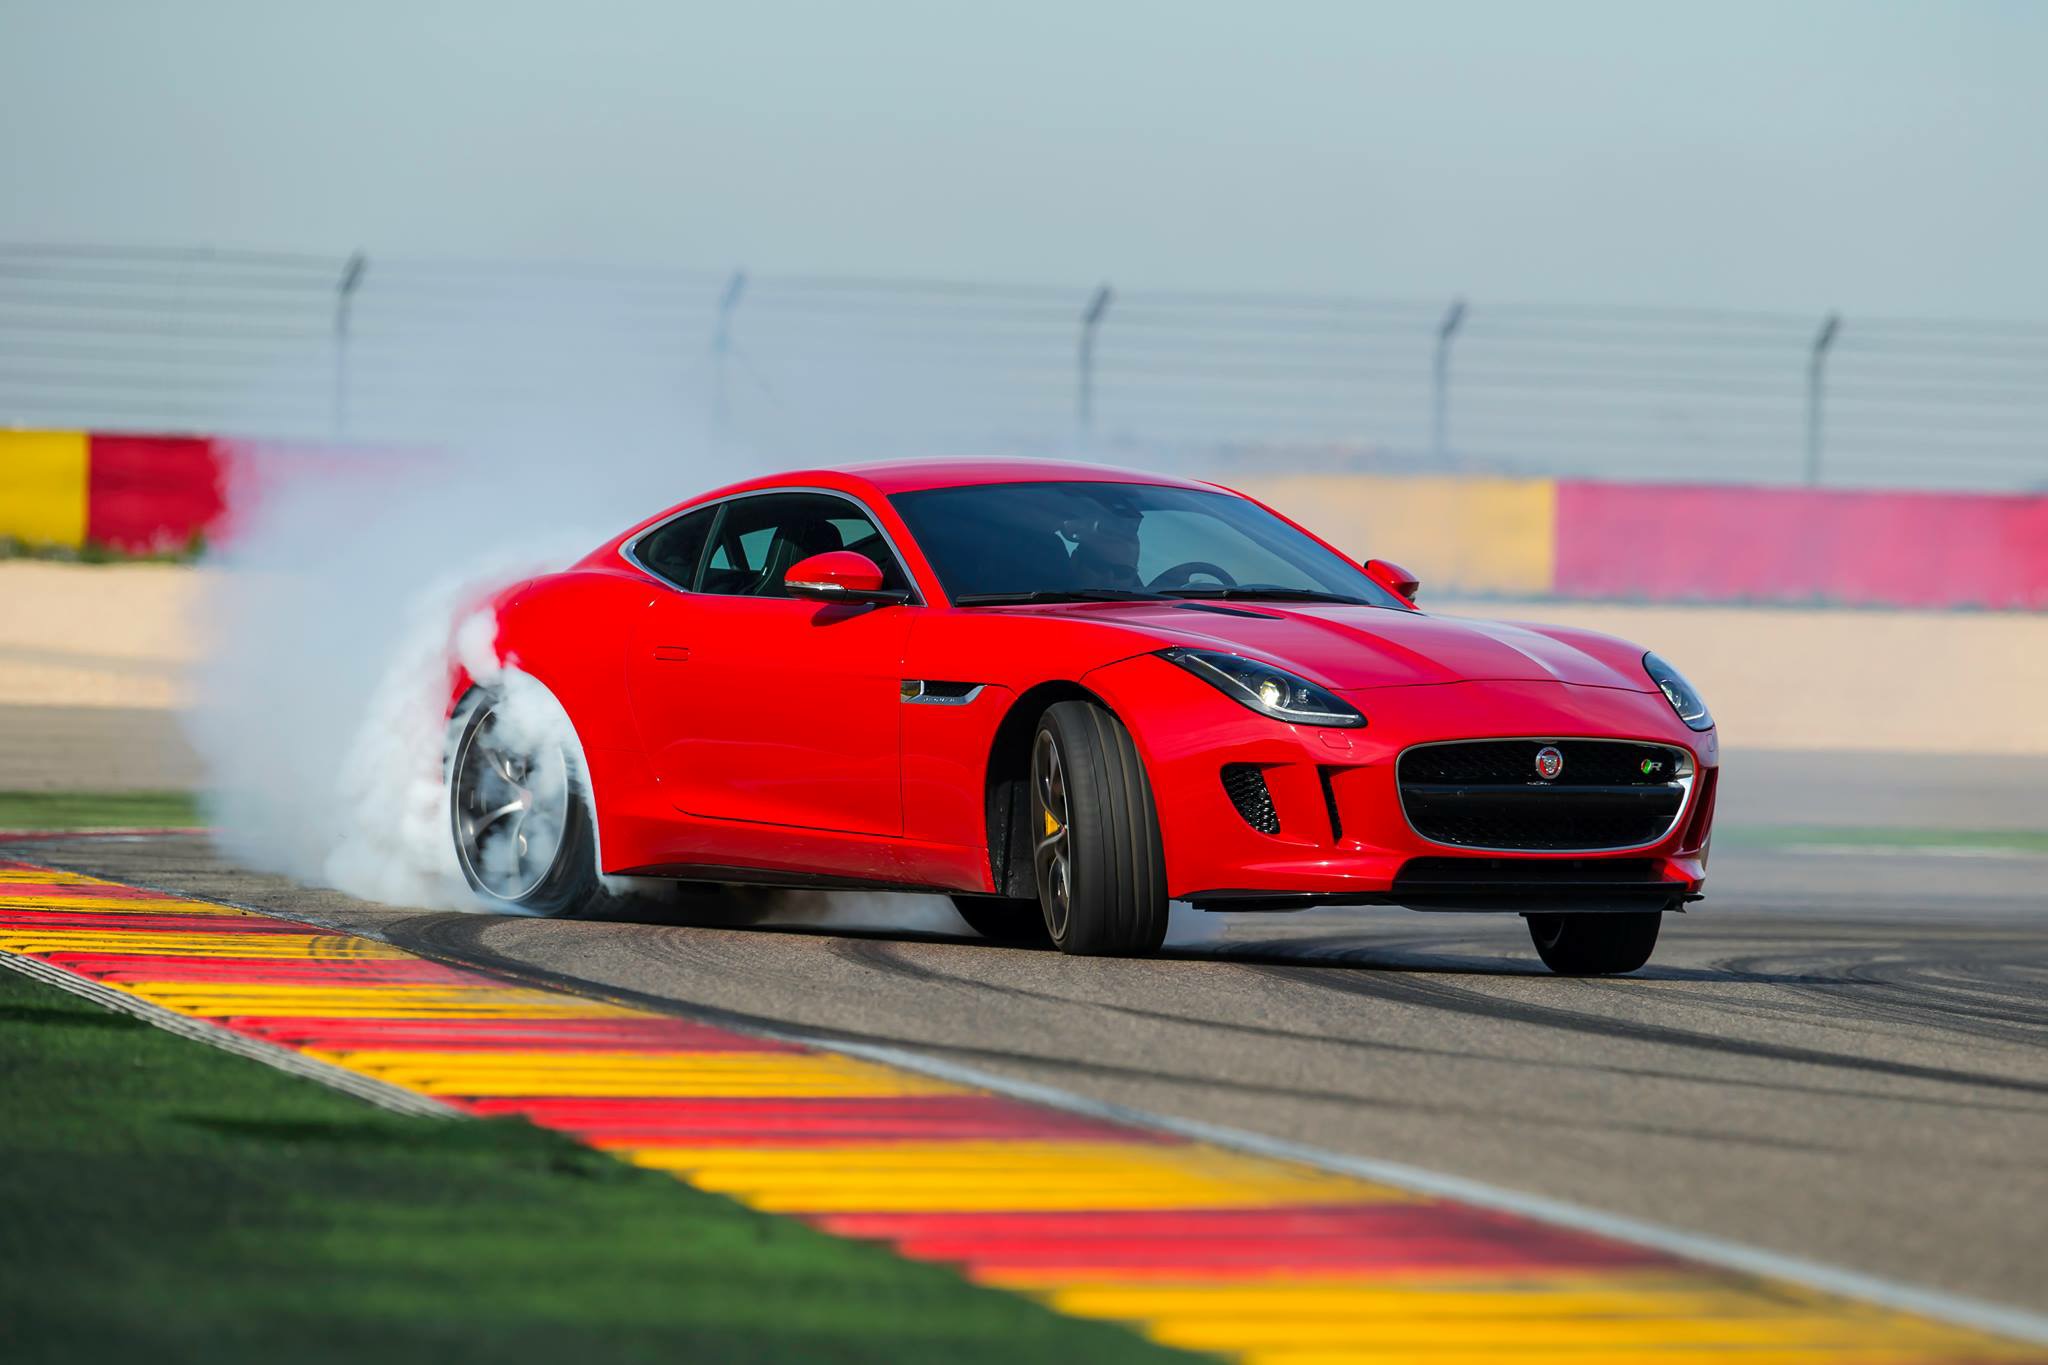 Drifting the Jaguar F-Type Coupe V8 R for the front cover of AutoCar Magazine